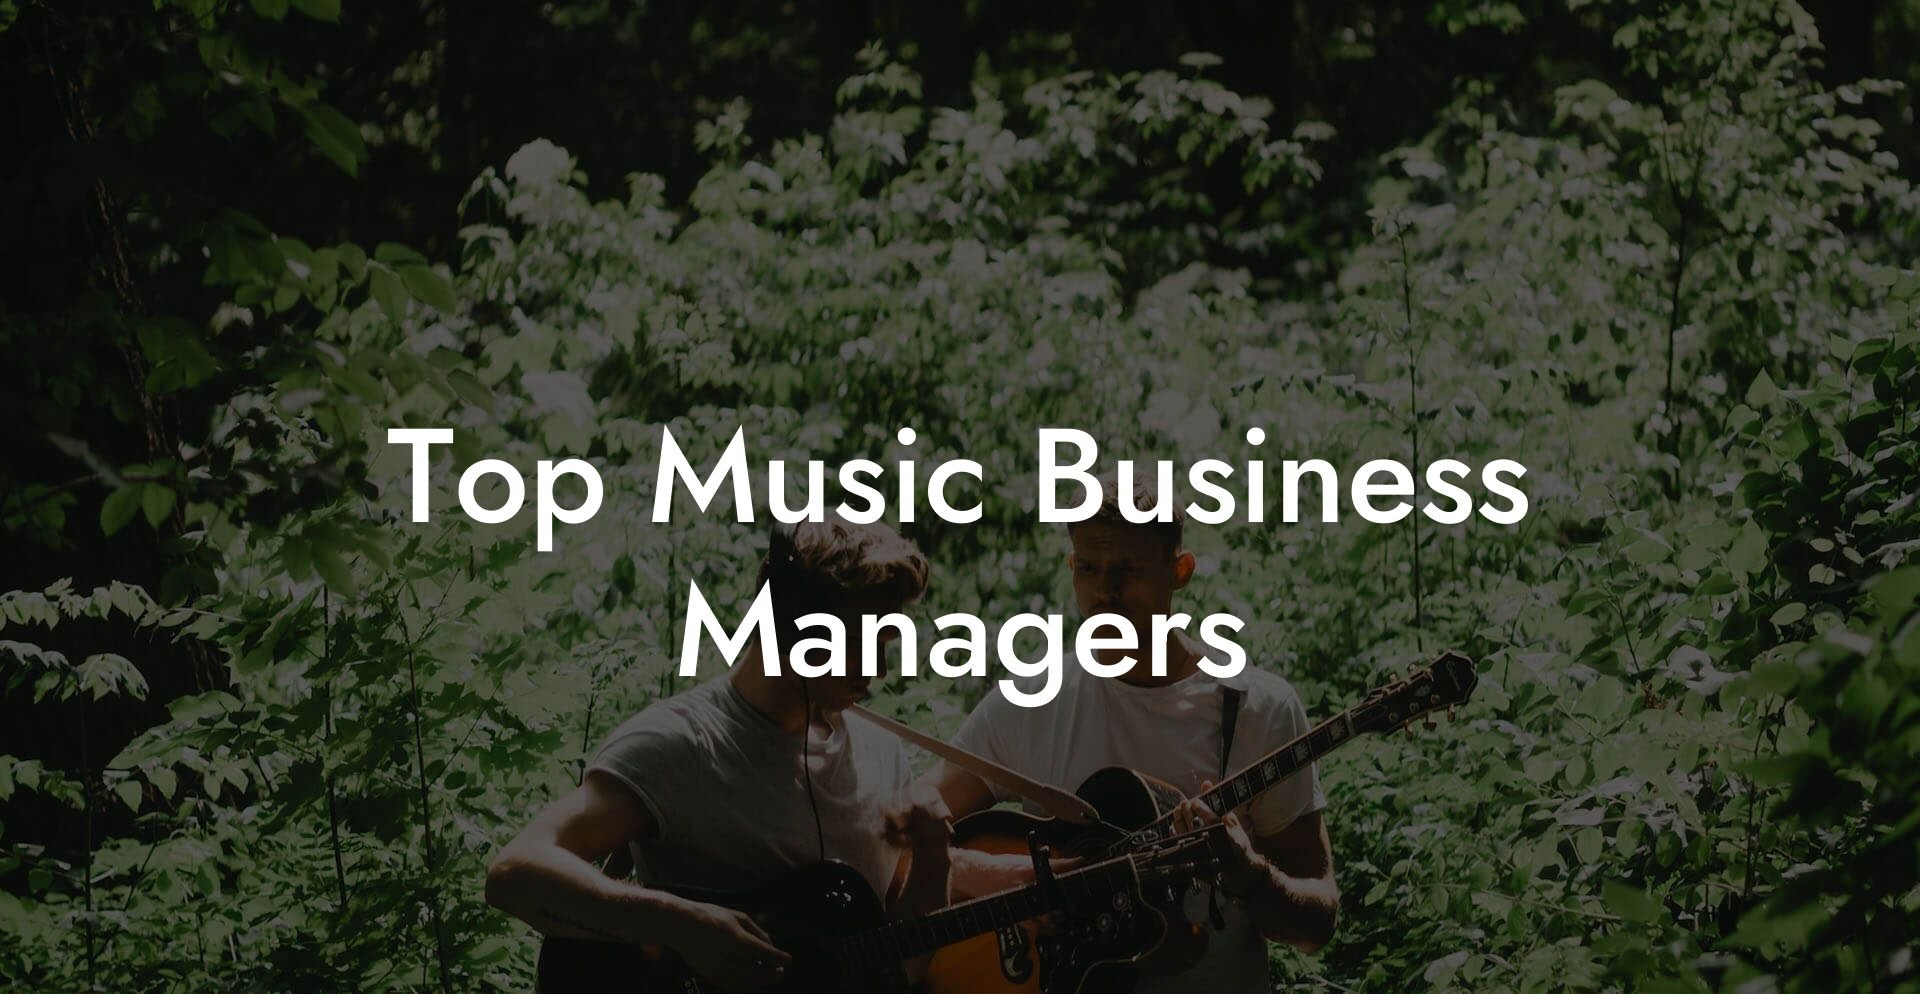 Top Music Business Managers